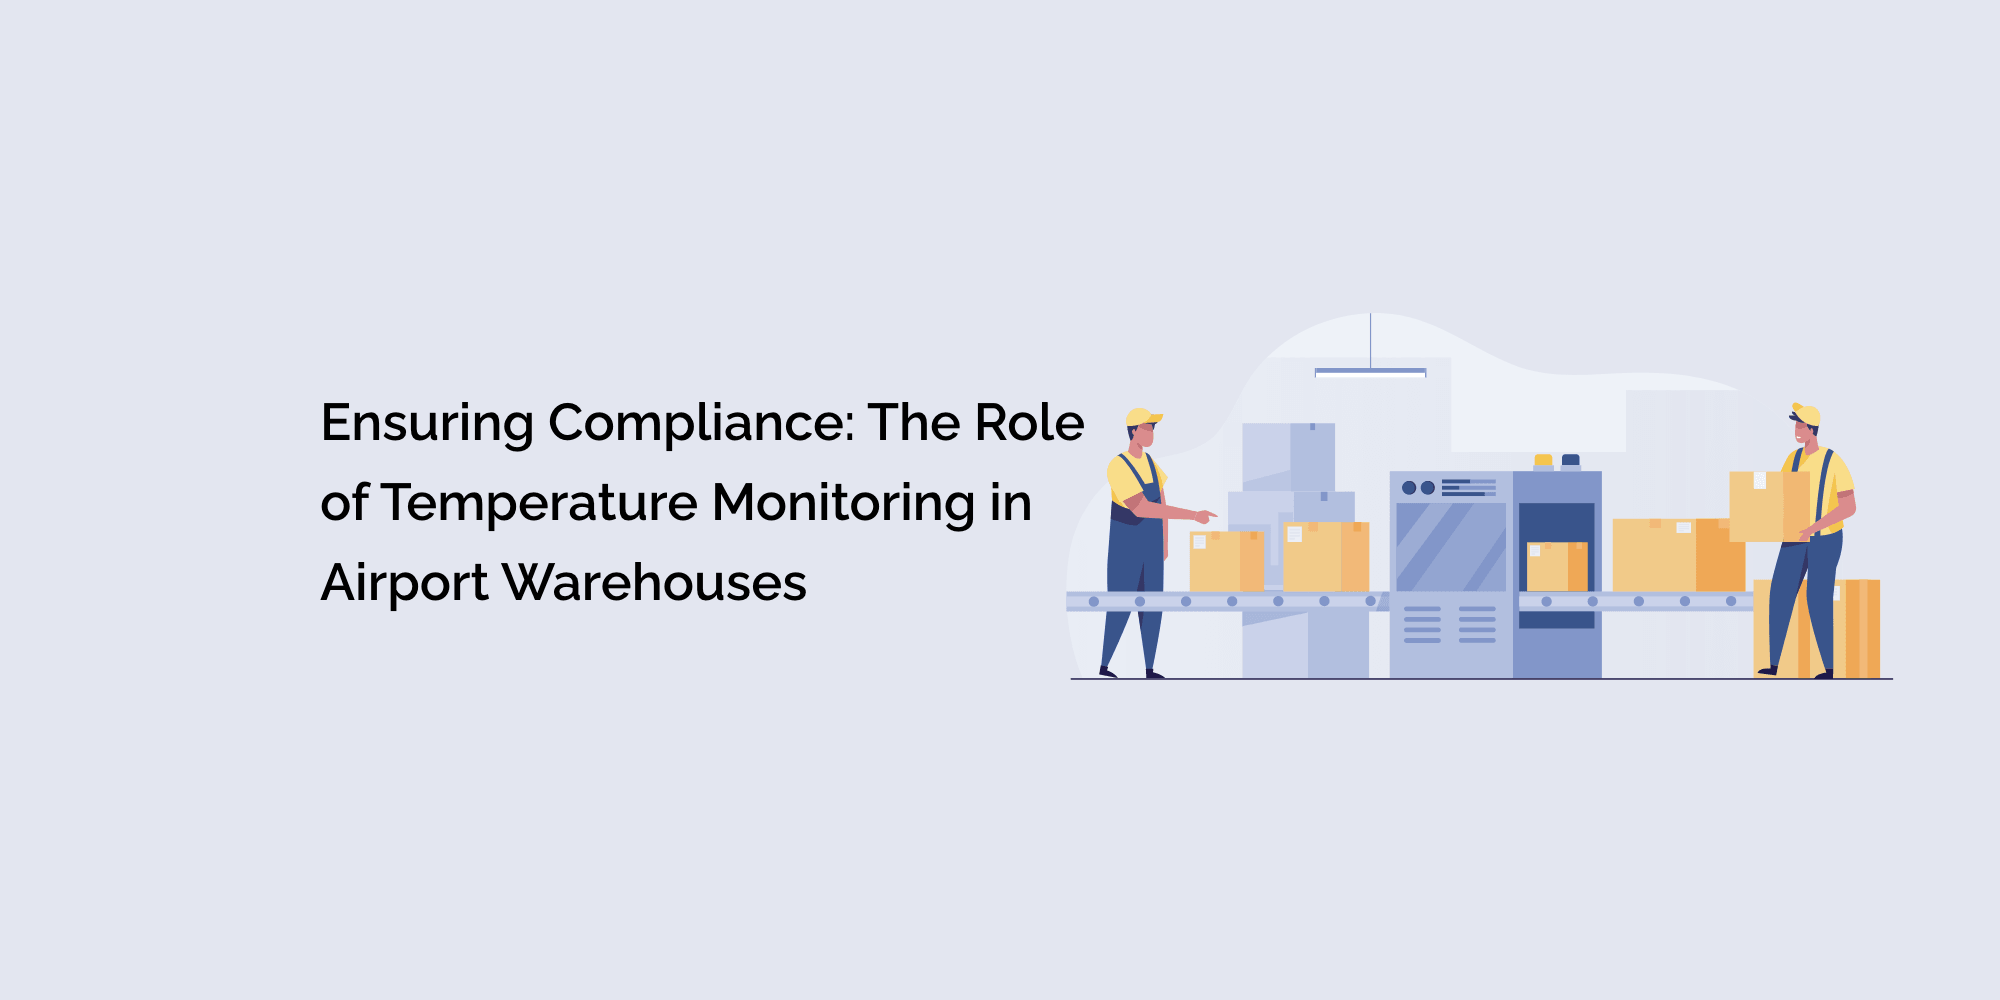 Ensuring Compliance: The Role of Temperature Monitoring in Airport Warehouses